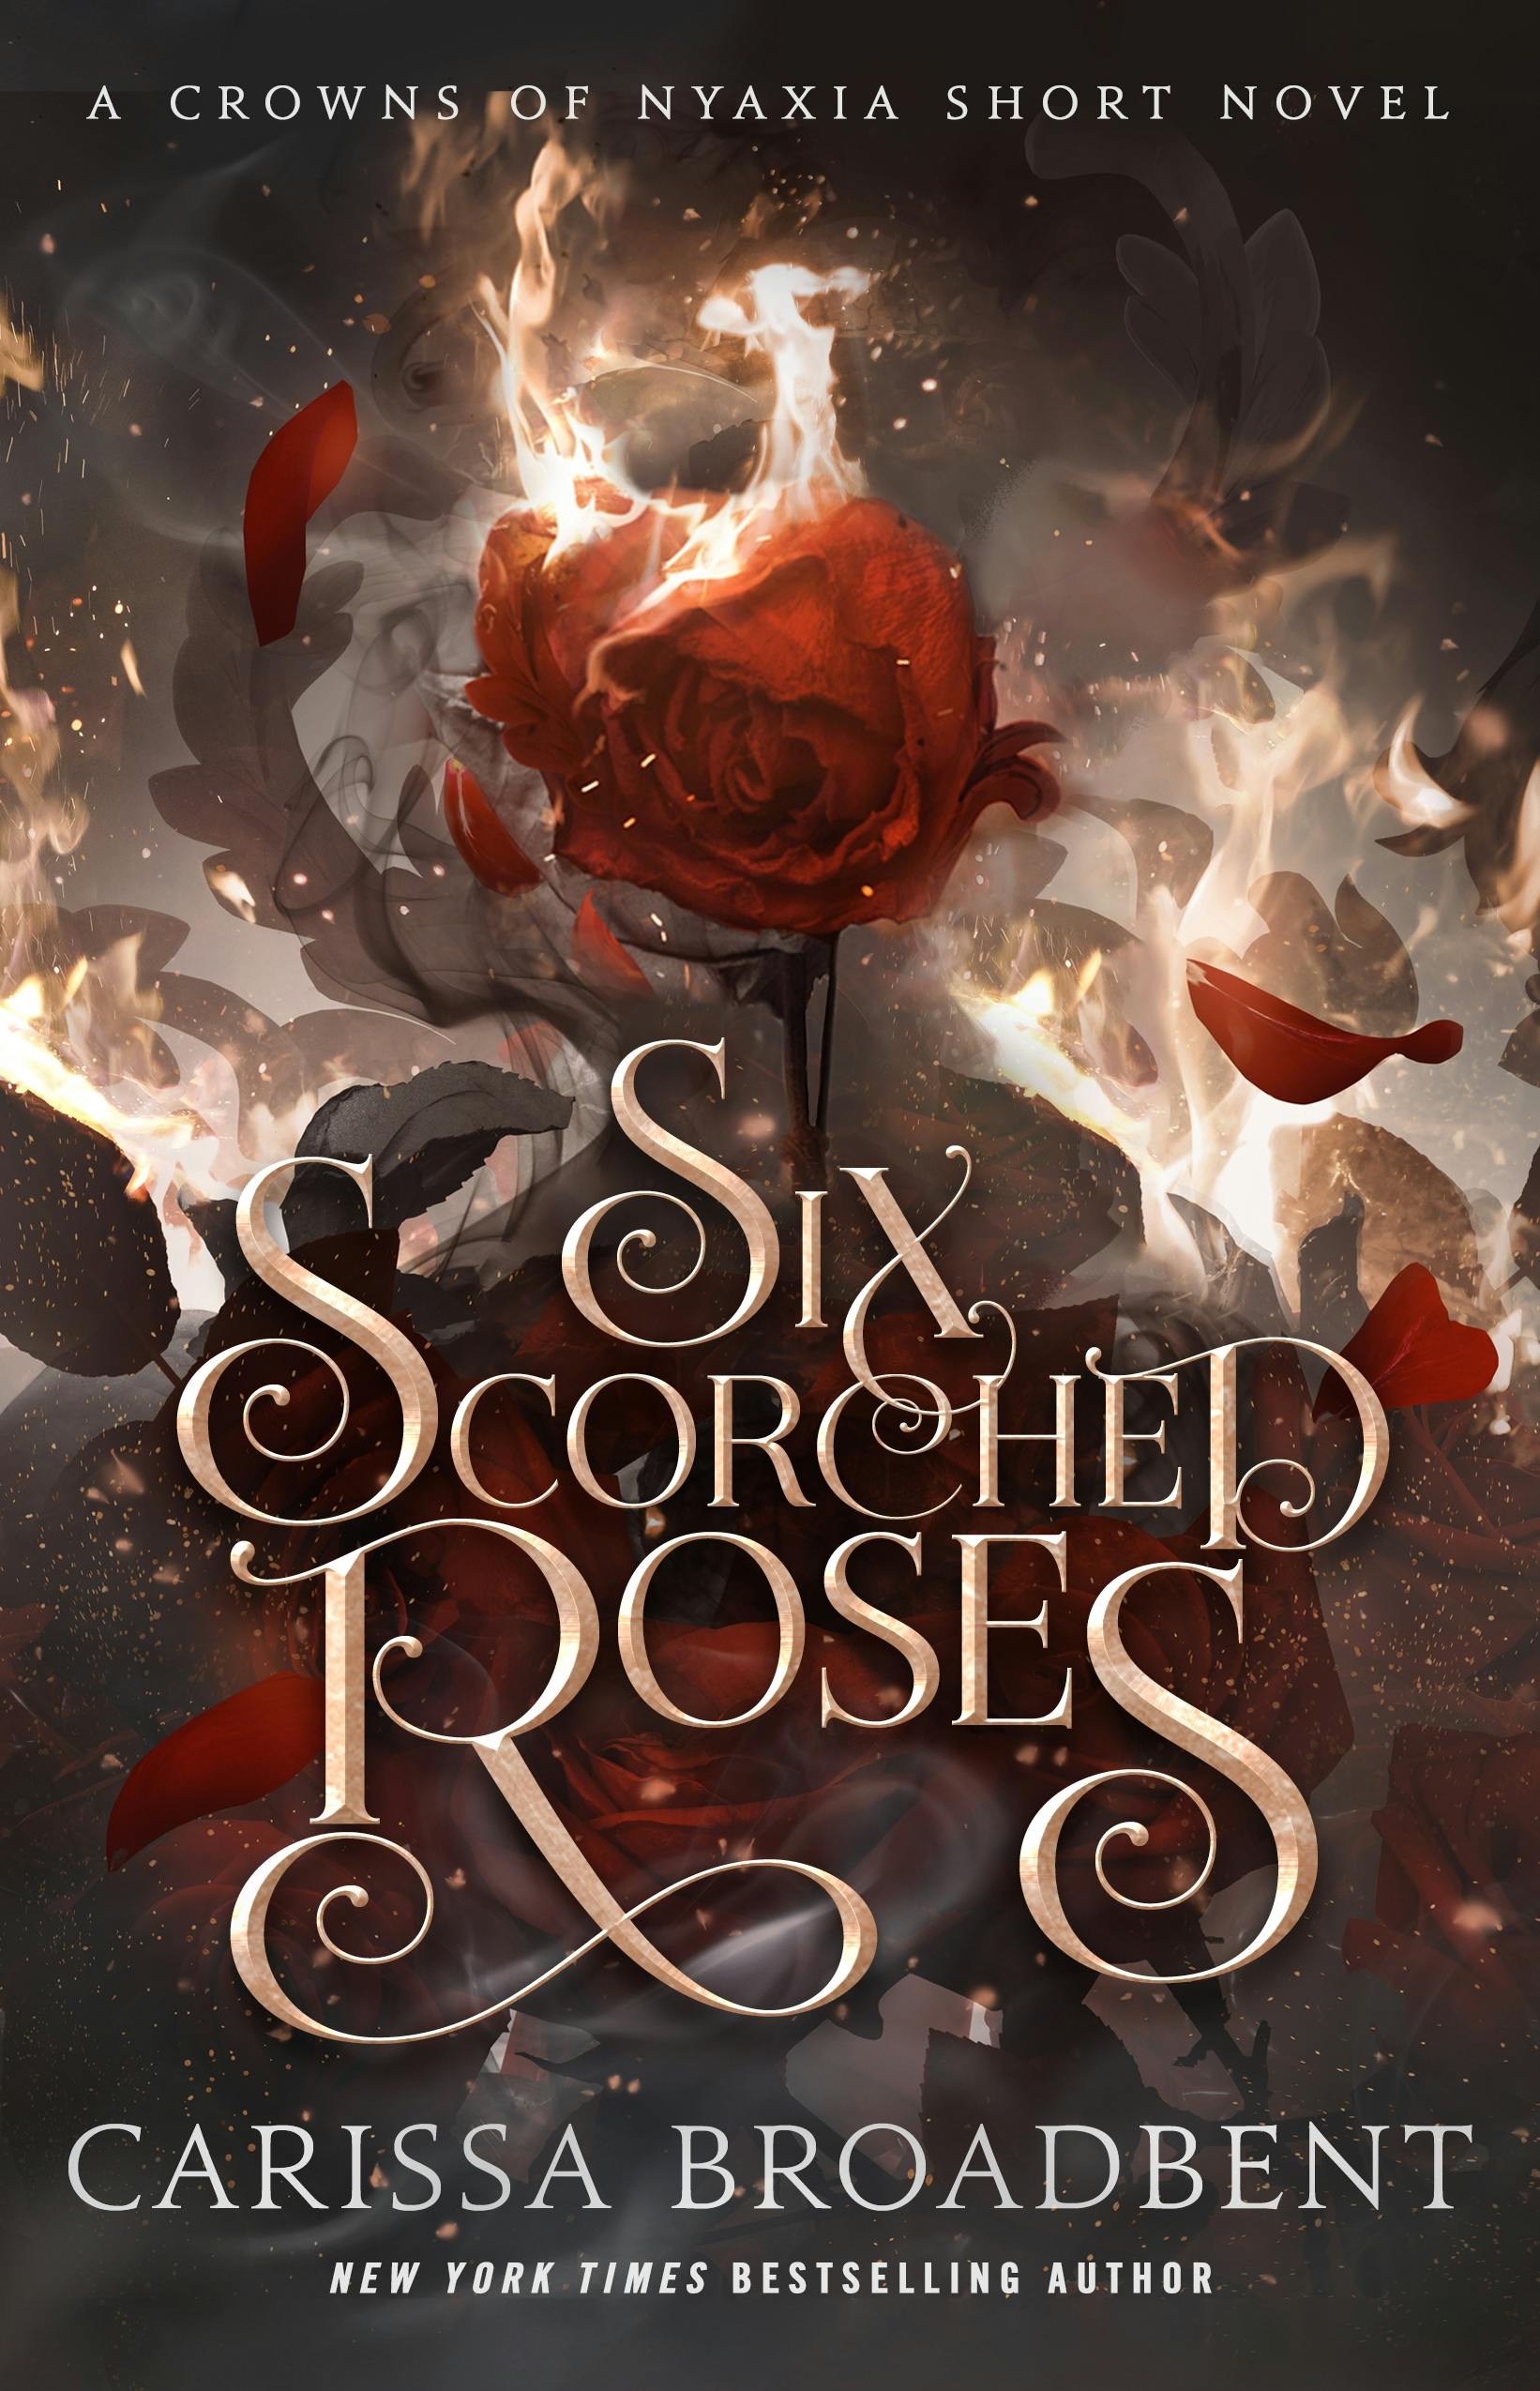 Cover for the book titled as: Six Scorched Roses